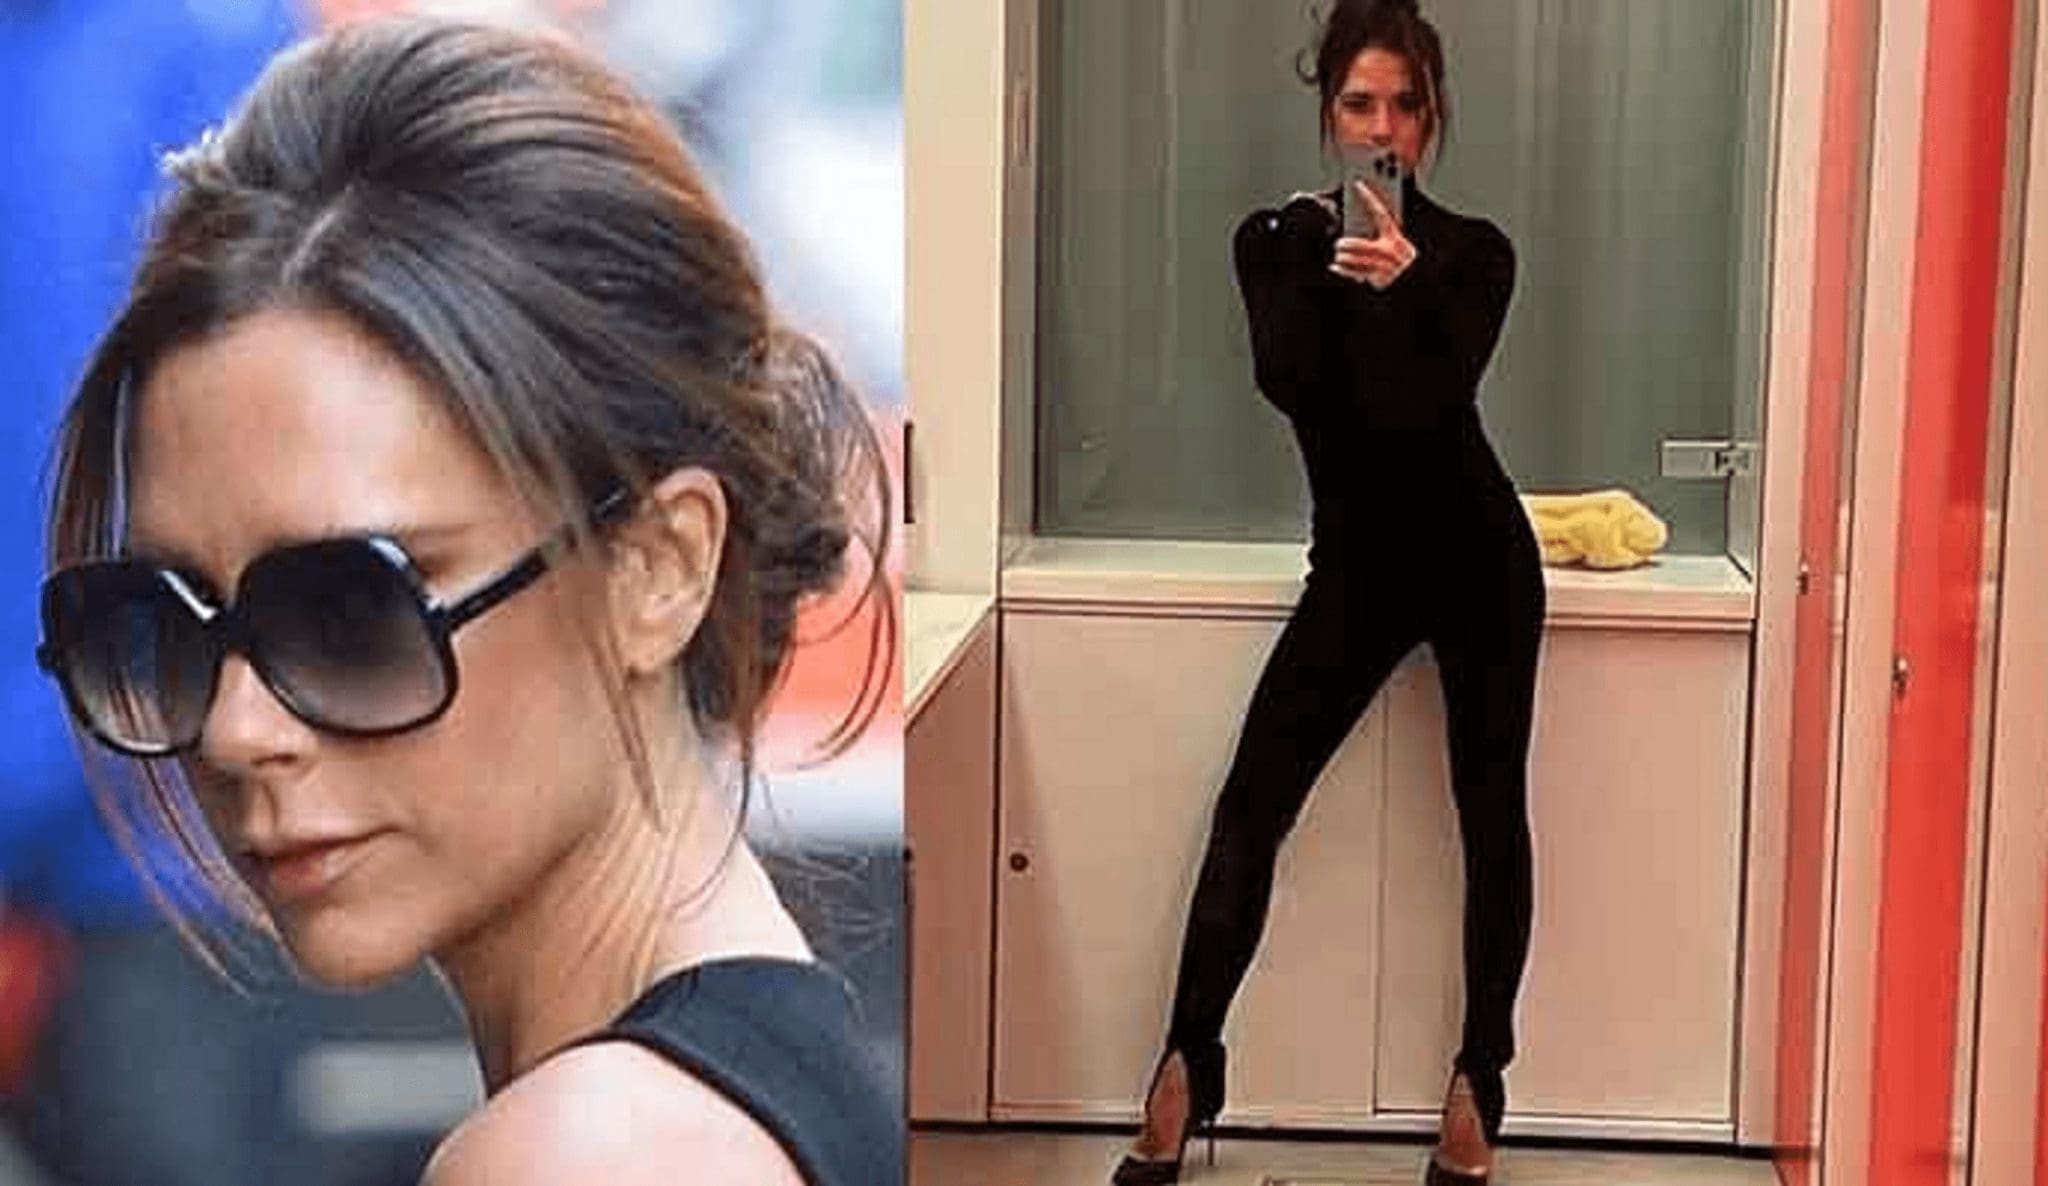 Victoria Beckham showed a spectacular restrained image that emphasizes the figure